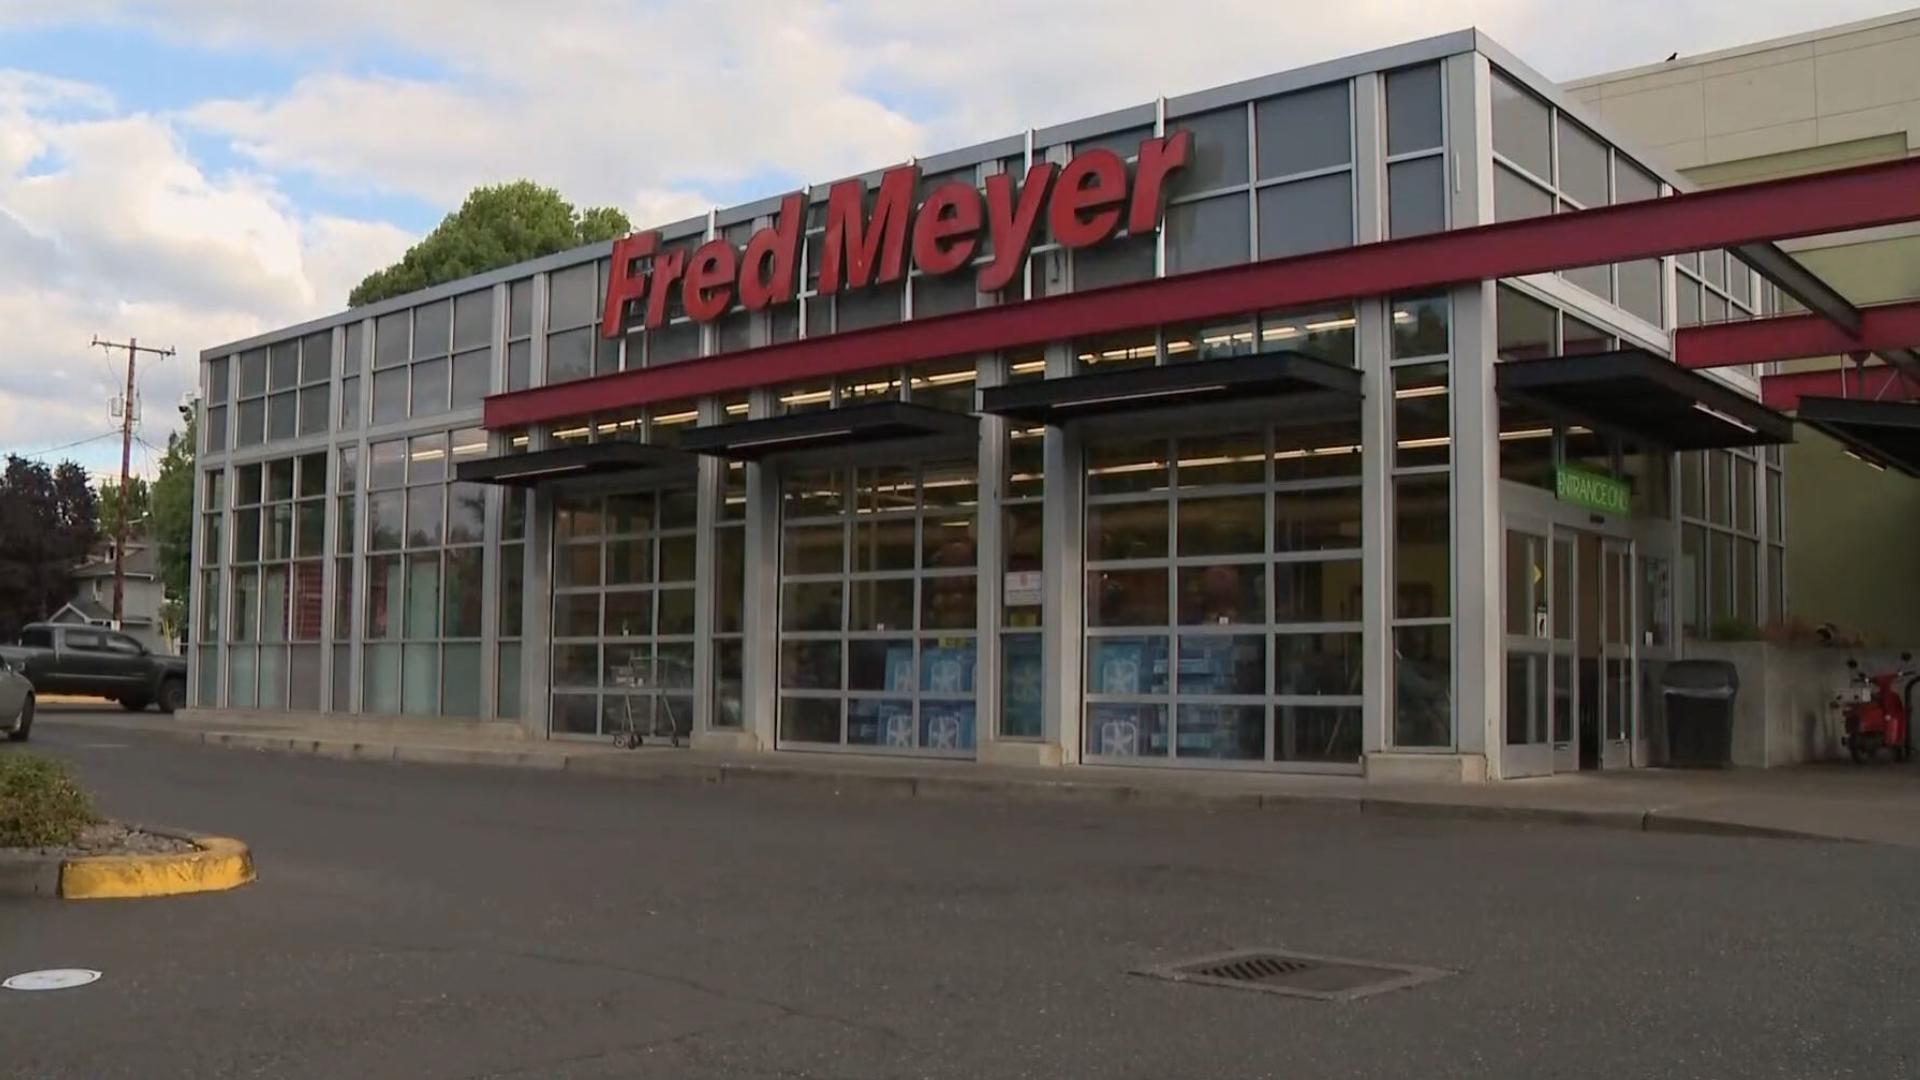 Officers were called to the Fred Meyer on Southeast Hawthorne Boulevard on reports that a man had inappropriately touched a 10-year-old girl, then fled.